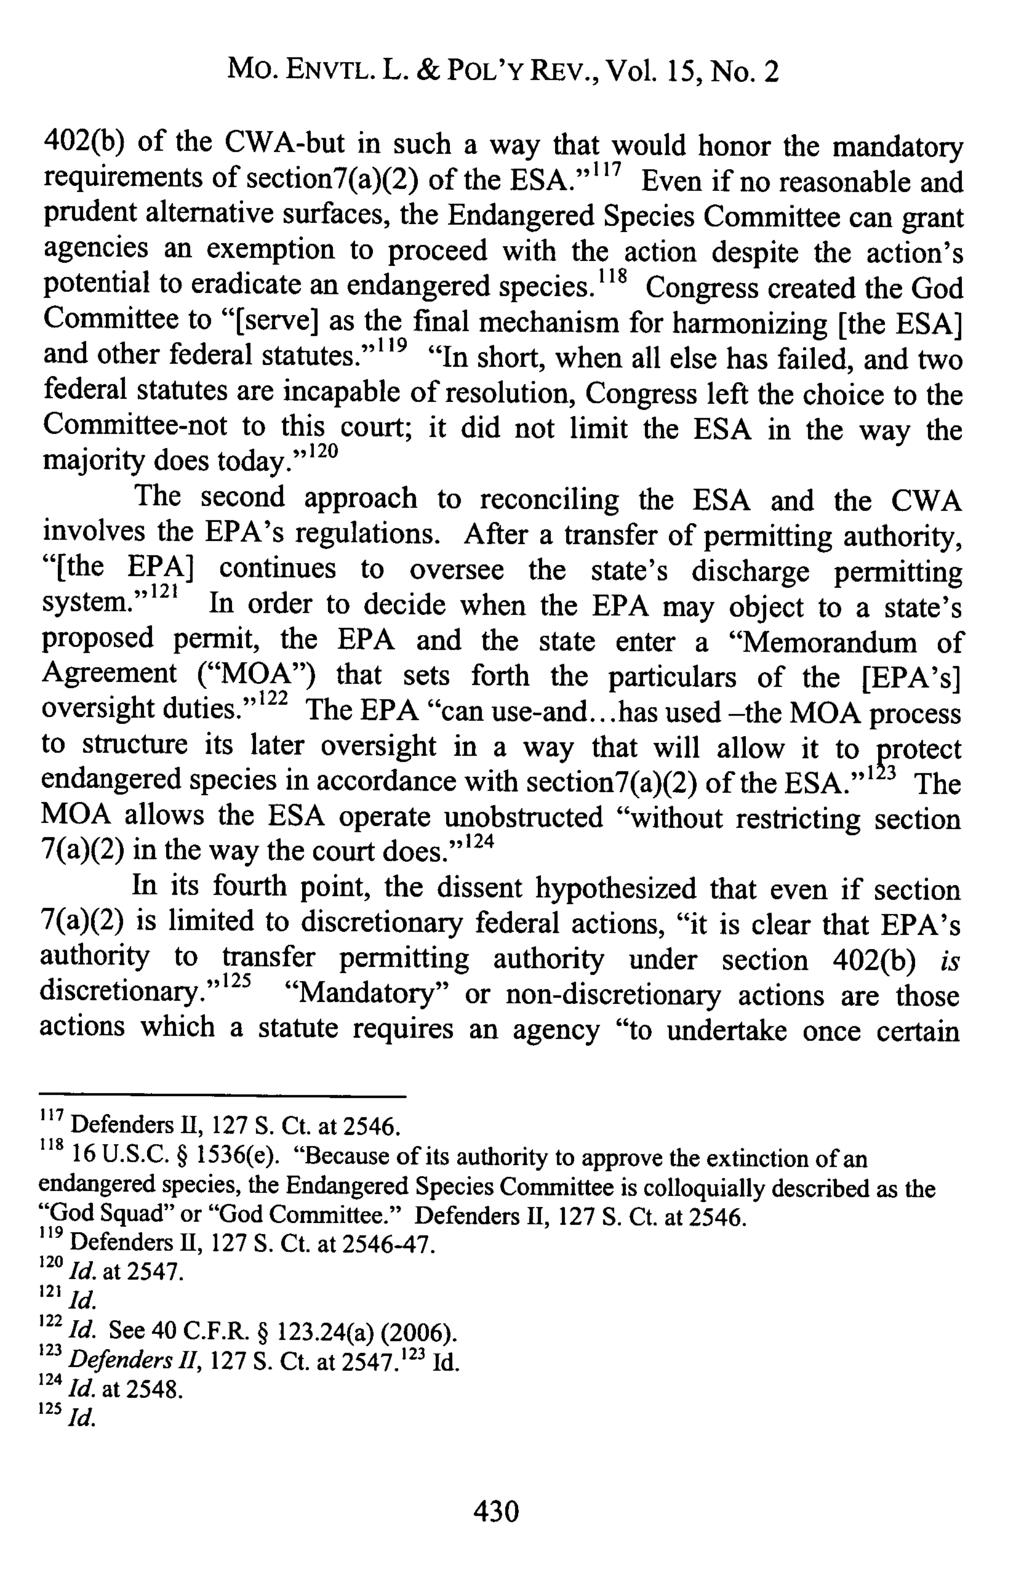 Mo. ENVTL. L. & POL'Y REv., Vol. 15, No. 2 402(b) of the CWA-but in such a way that would honor the mandatory requirements of section7(a)(2) of the ESA.